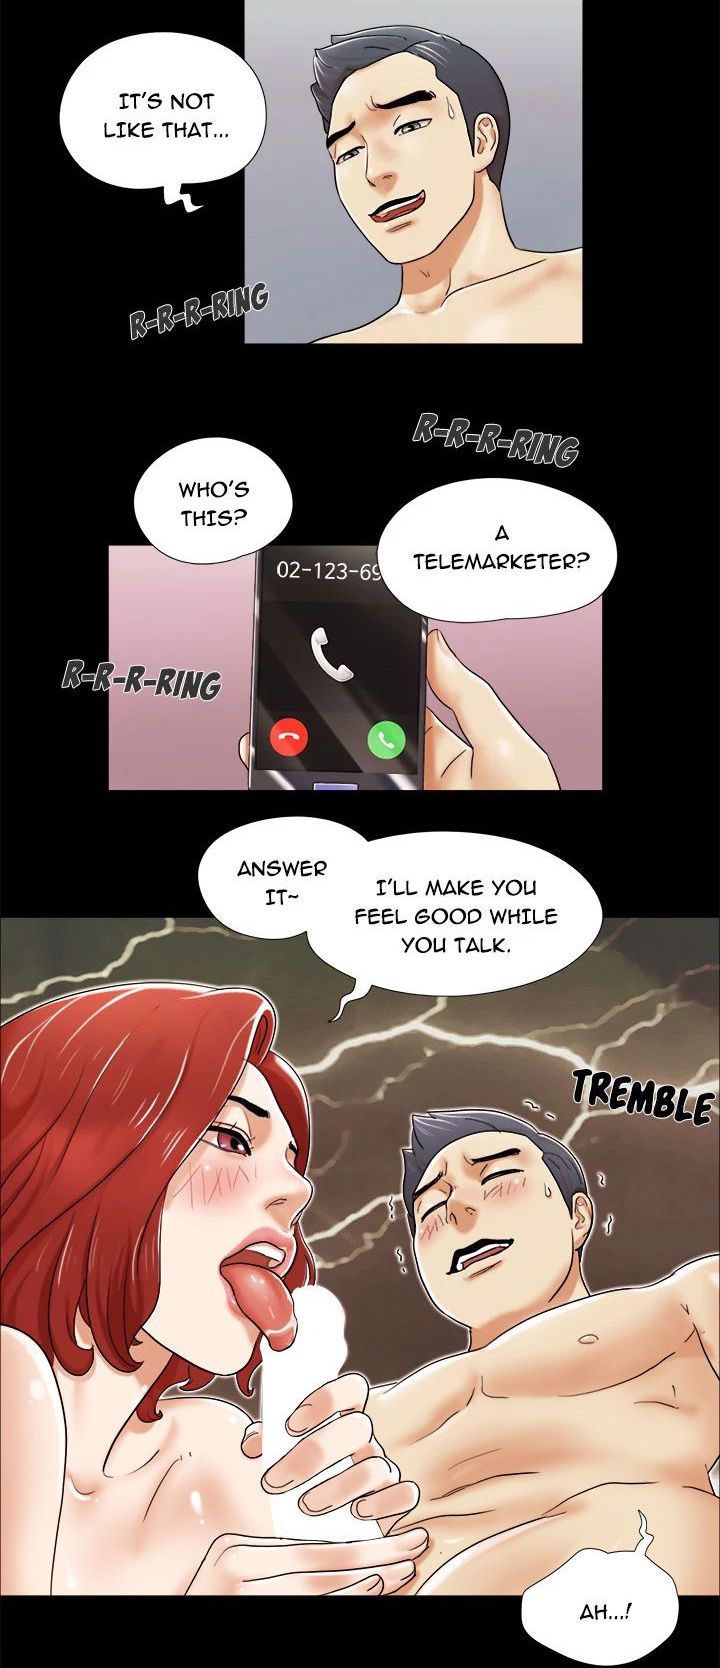 [Muldeok] Double Trouble • Chapter 3: Another Me [Netorare World] 74